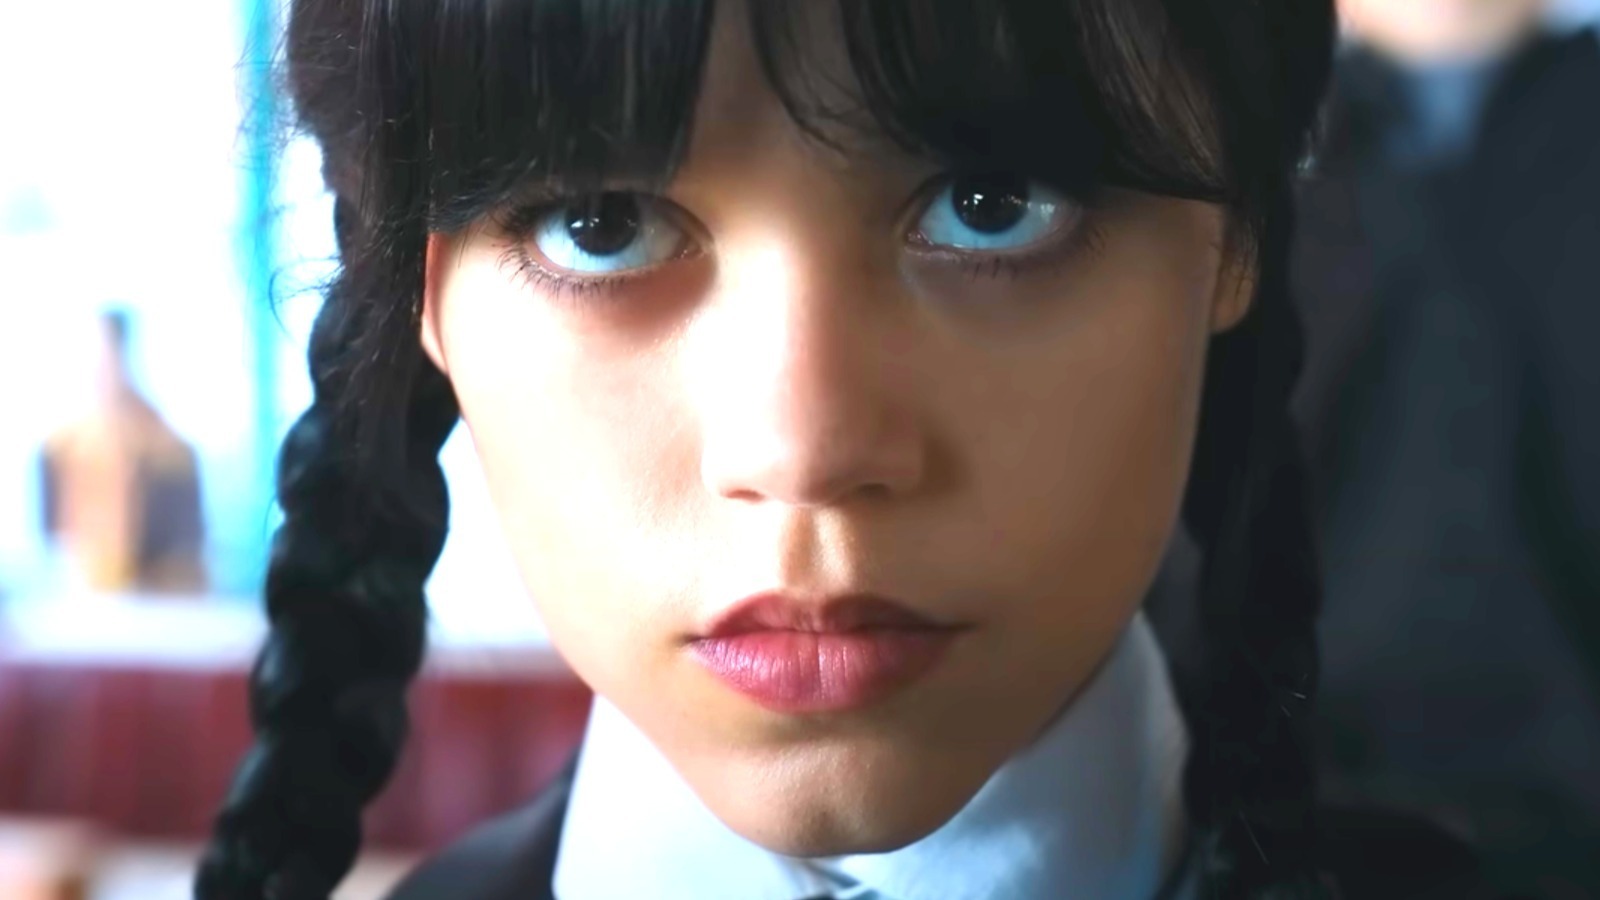 Wednesday Addams images for your profile pictures, from Netflix